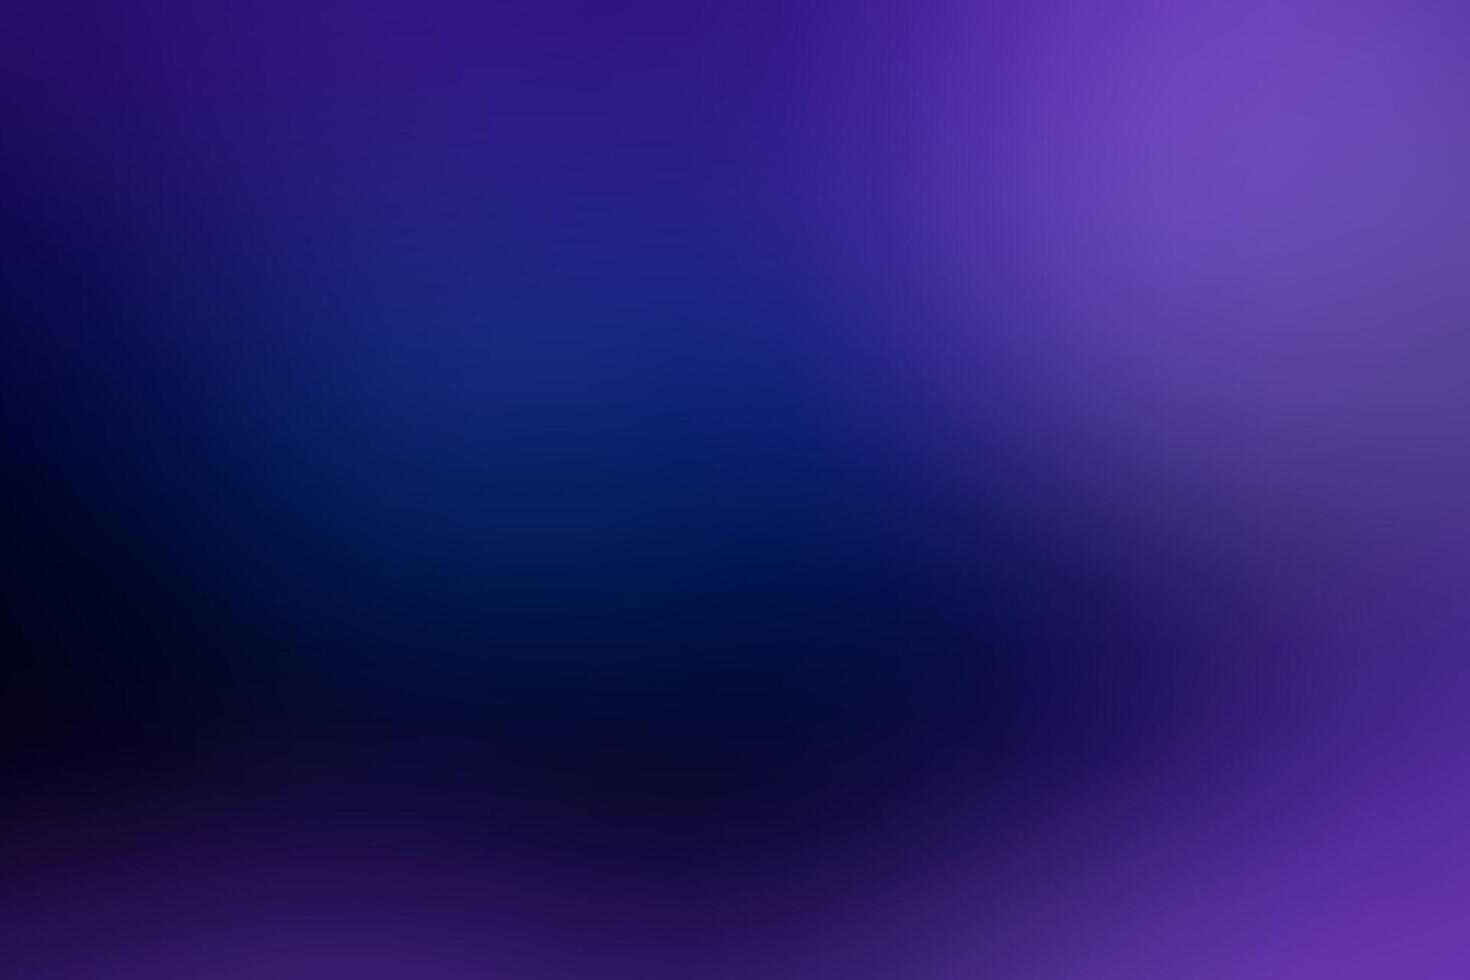 Vivid Colorful Blurry Wallpaper Background for Artistic Purposes vector